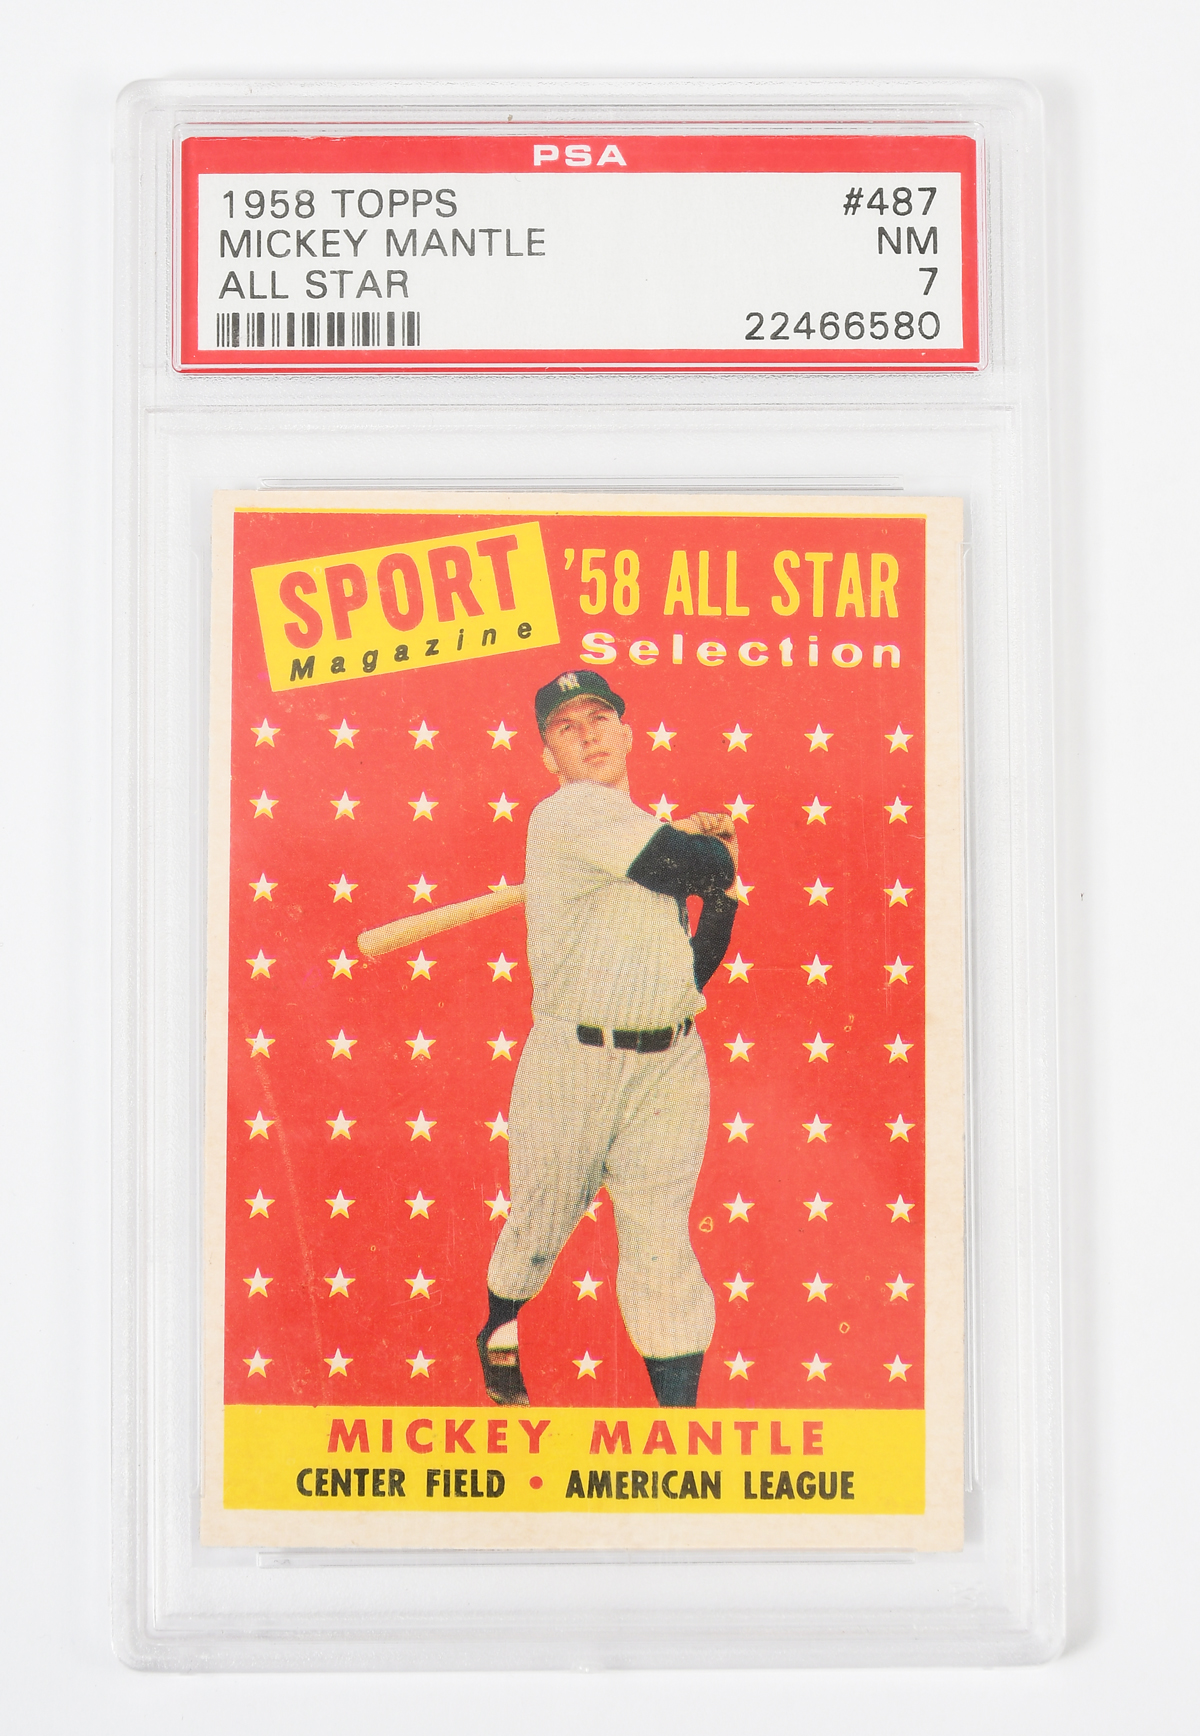 1958 TOPPS MICKEY MANTLE ALL STAR 2ecb65